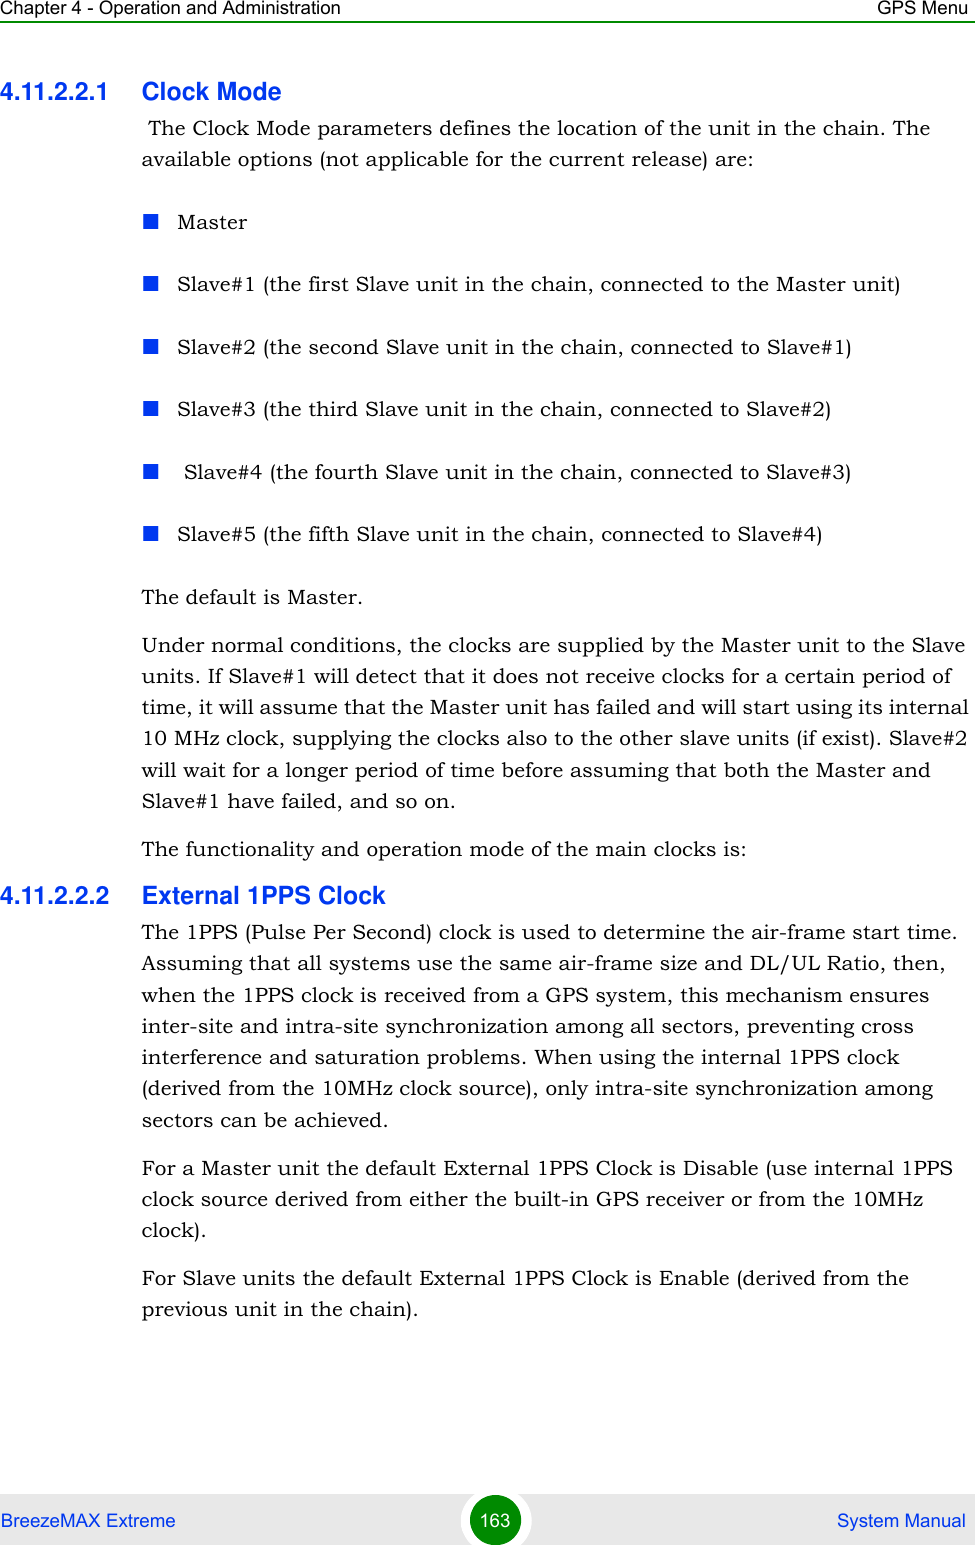 Chapter 4 - Operation and Administration GPS MenuBreezeMAX Extreme 163  System Manual4.11.2.2.1 Clock Mode The Clock Mode parameters defines the location of the unit in the chain. The available options (not applicable for the current release) are:MasterSlave#1 (the first Slave unit in the chain, connected to the Master unit)Slave#2 (the second Slave unit in the chain, connected to Slave#1)Slave#3 (the third Slave unit in the chain, connected to Slave#2) Slave#4 (the fourth Slave unit in the chain, connected to Slave#3)Slave#5 (the fifth Slave unit in the chain, connected to Slave#4)The default is Master.Under normal conditions, the clocks are supplied by the Master unit to the Slave units. If Slave#1 will detect that it does not receive clocks for a certain period of time, it will assume that the Master unit has failed and will start using its internal 10 MHz clock, supplying the clocks also to the other slave units (if exist). Slave#2 will wait for a longer period of time before assuming that both the Master and Slave#1 have failed, and so on.The functionality and operation mode of the main clocks is:4.11.2.2.2 External 1PPS ClockThe 1PPS (Pulse Per Second) clock is used to determine the air-frame start time. Assuming that all systems use the same air-frame size and DL/UL Ratio, then, when the 1PPS clock is received from a GPS system, this mechanism ensures inter-site and intra-site synchronization among all sectors, preventing cross interference and saturation problems. When using the internal 1PPS clock (derived from the 10MHz clock source), only intra-site synchronization among sectors can be achieved.For a Master unit the default External 1PPS Clock is Disable (use internal 1PPS clock source derived from either the built-in GPS receiver or from the 10MHz clock).For Slave units the default External 1PPS Clock is Enable (derived from the previous unit in the chain).